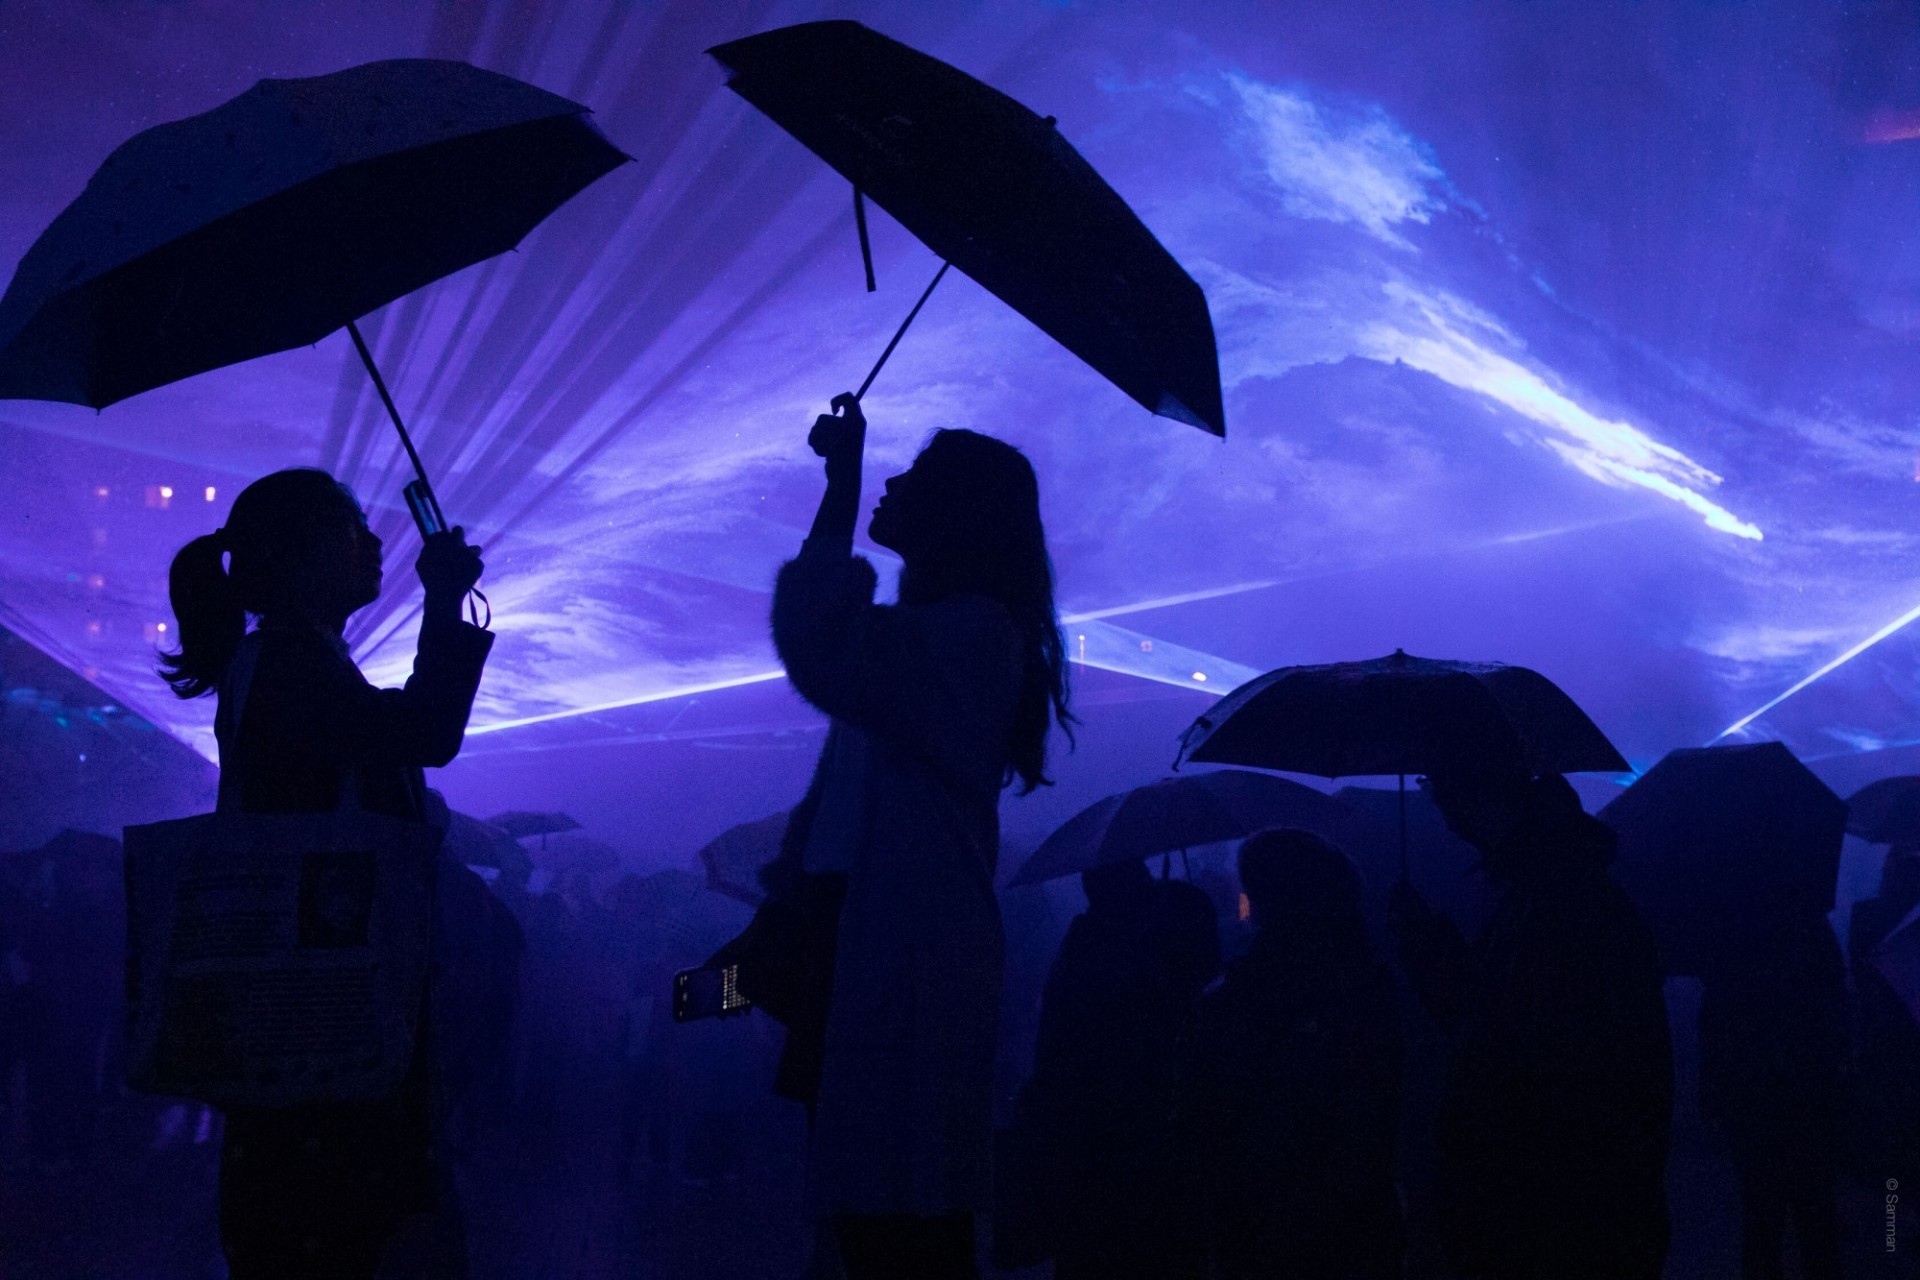 People in silhouette with umbrellas against a blue background of light